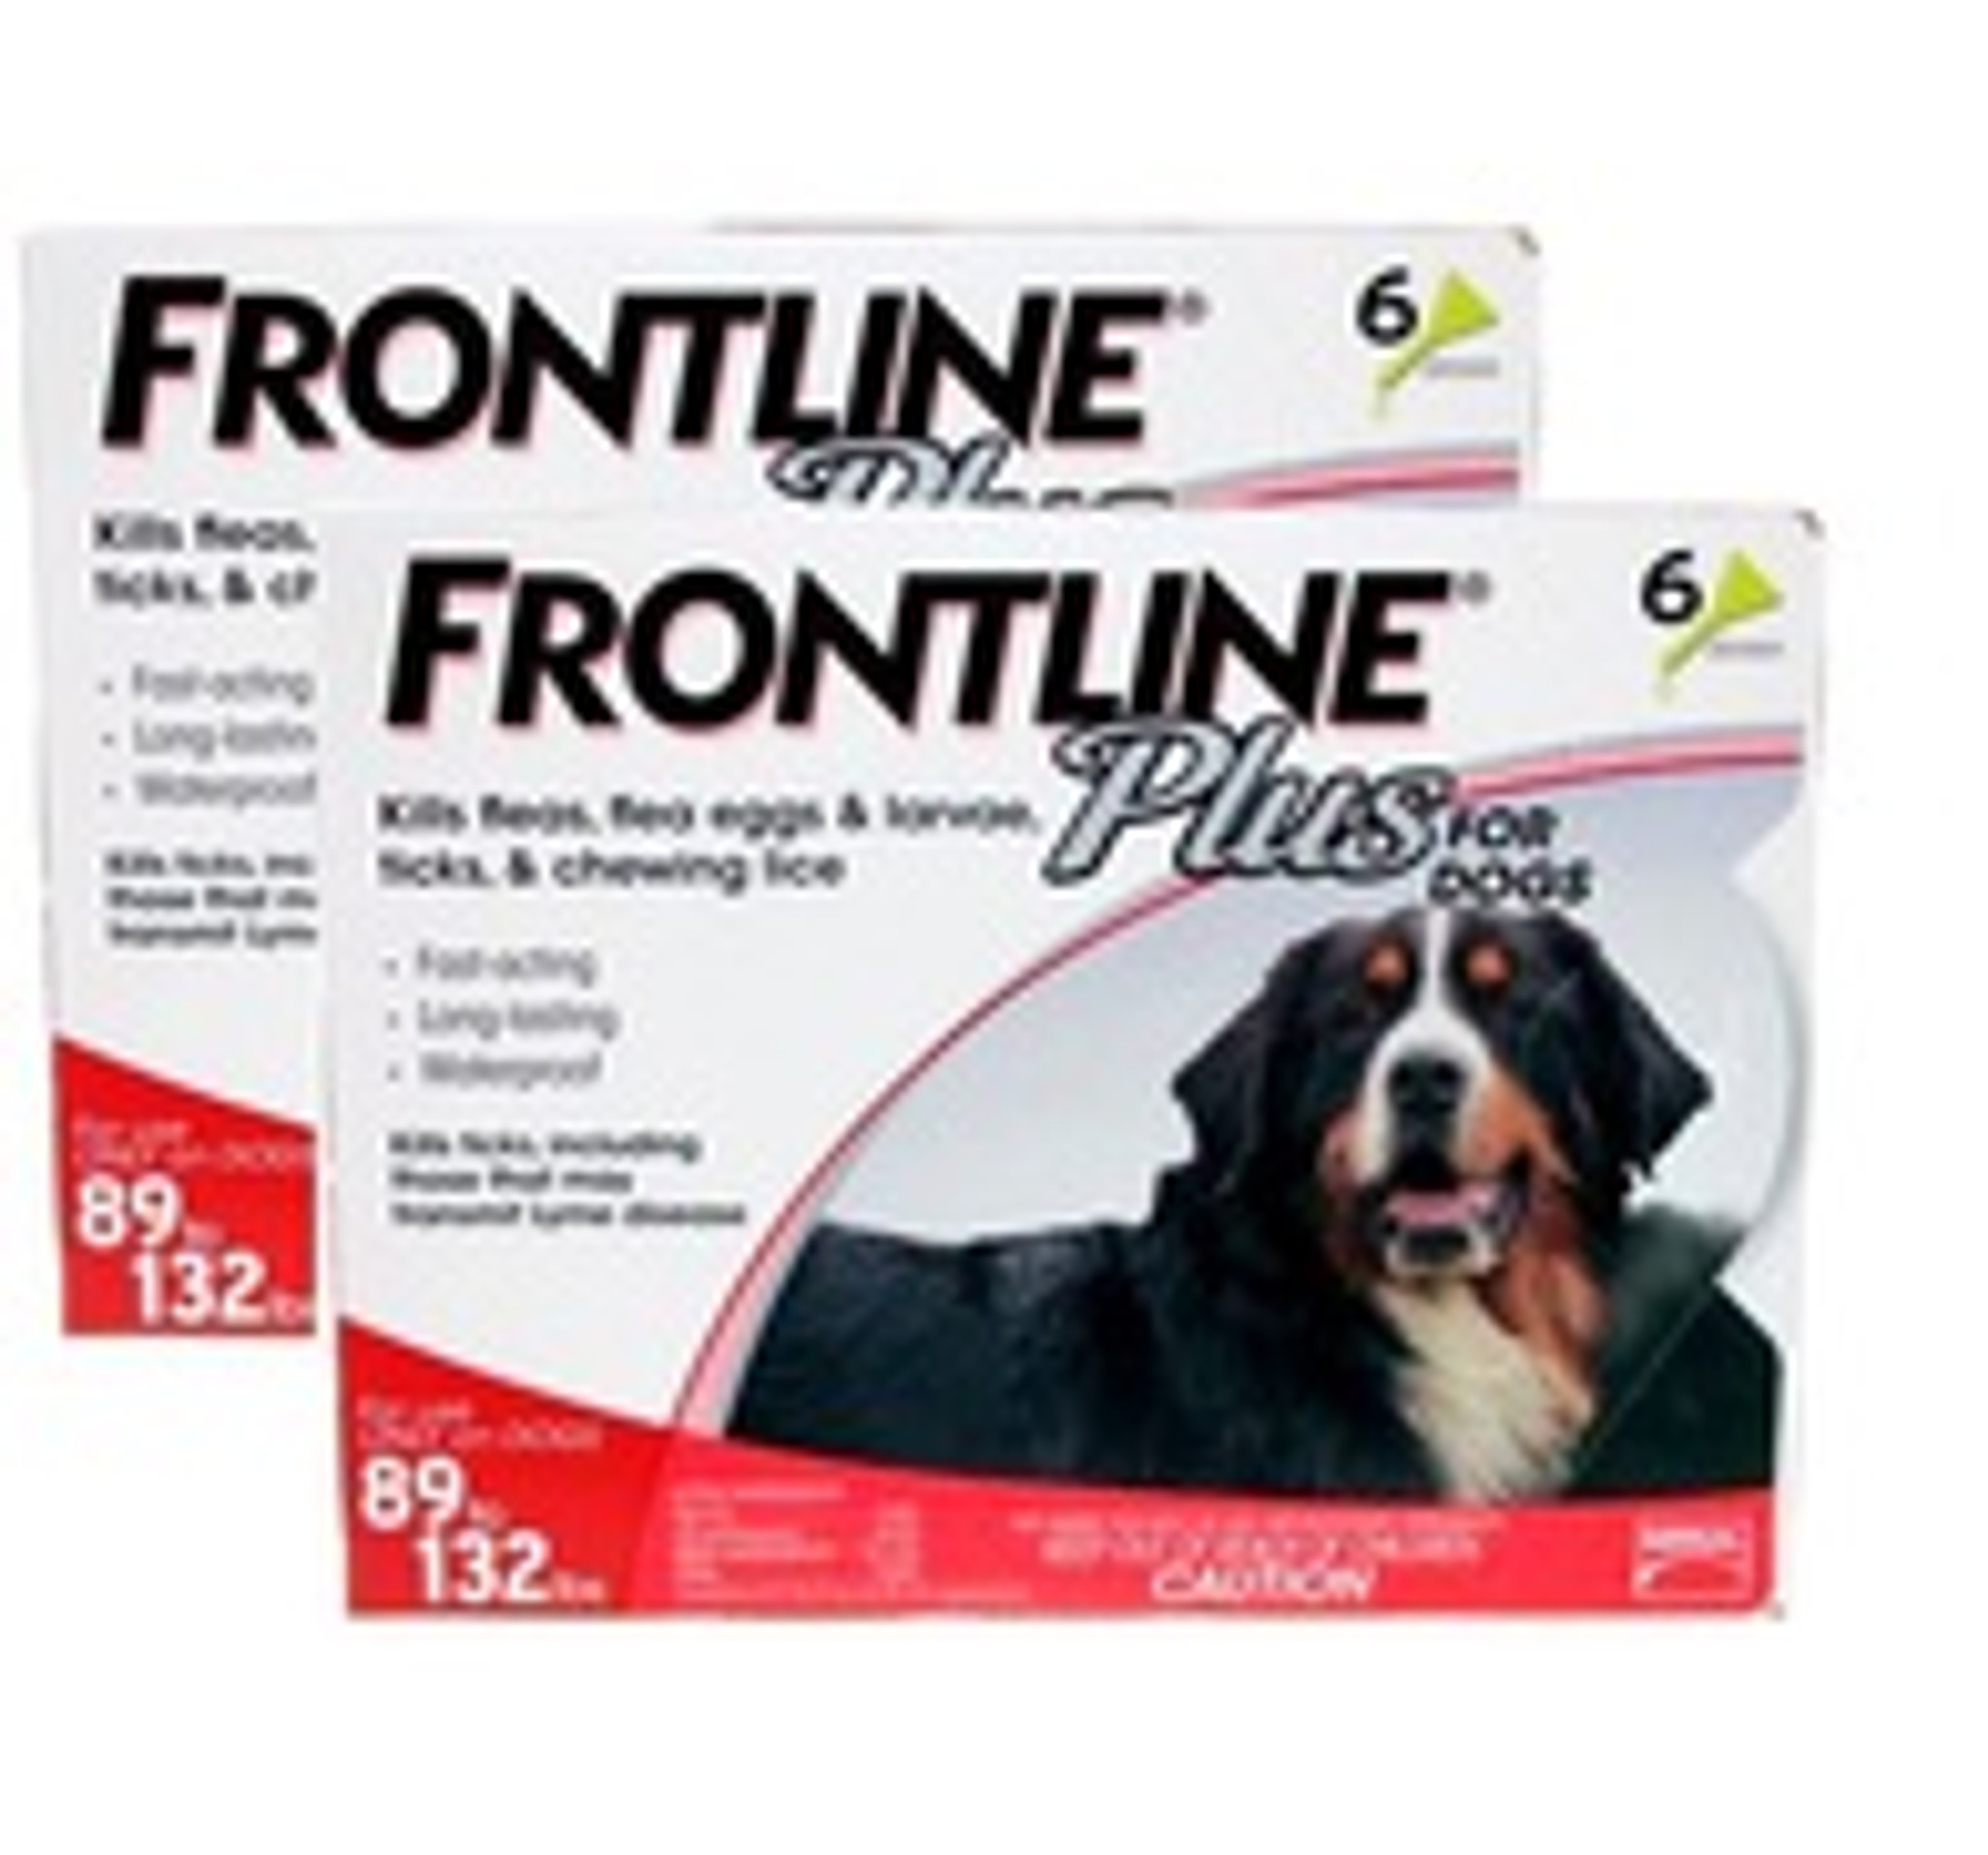 frontline-plus-for-dogs-89-132-lbs-40-1-60-kg-red-12-doses